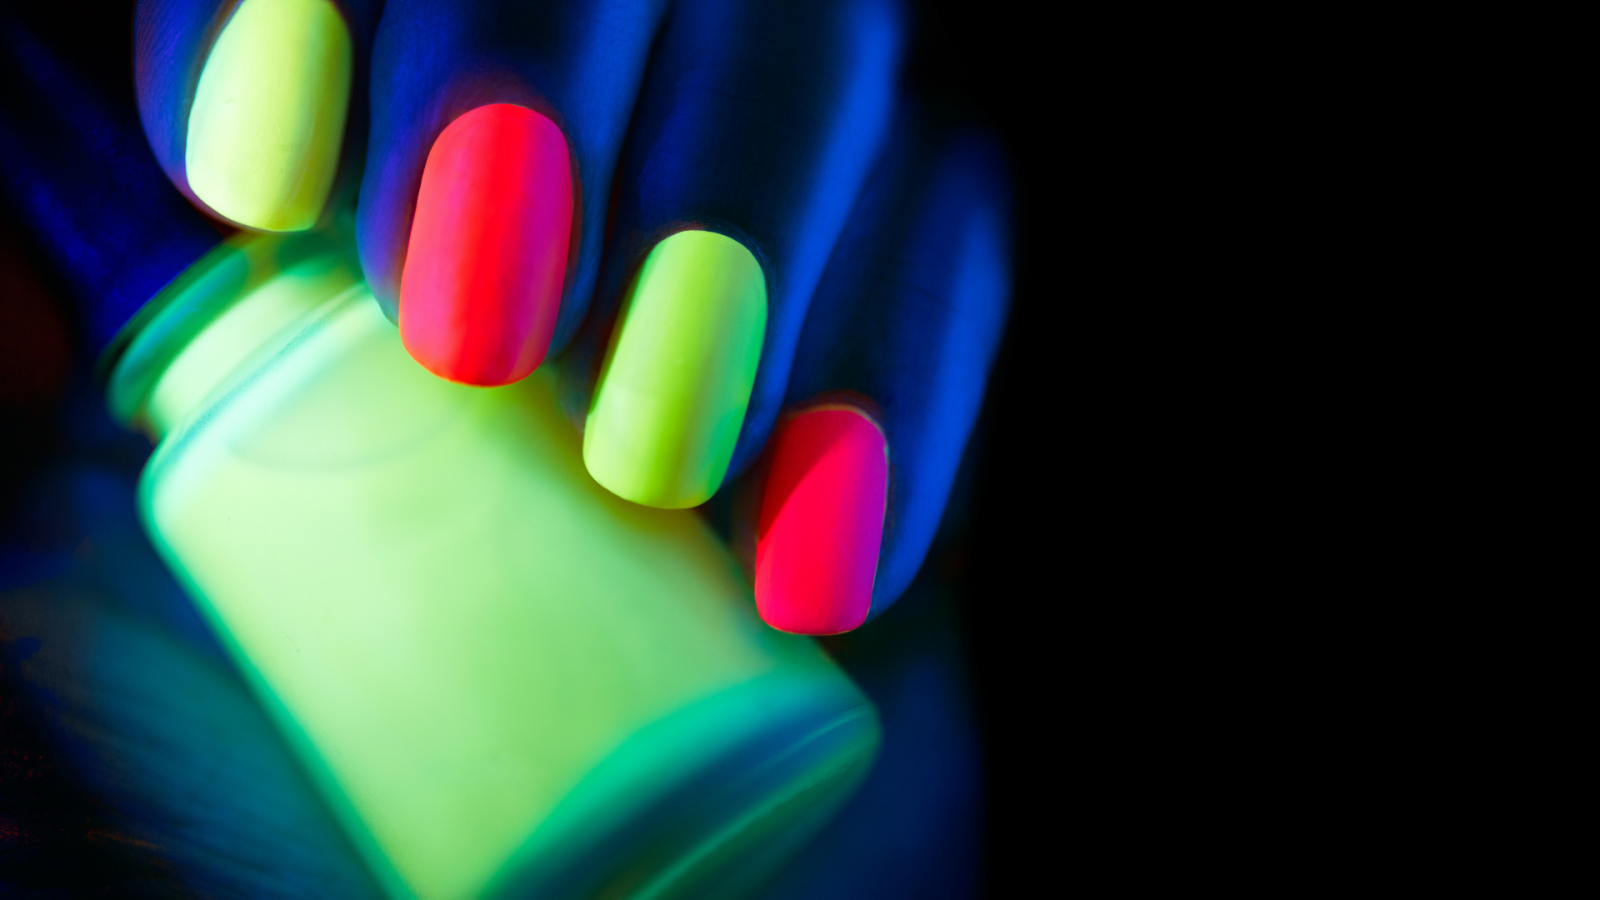 Part of a hand shown holding a bottle of fluorescent yellow nail vanish. The nails are painted with fluorescent vanish in yellow and pink.